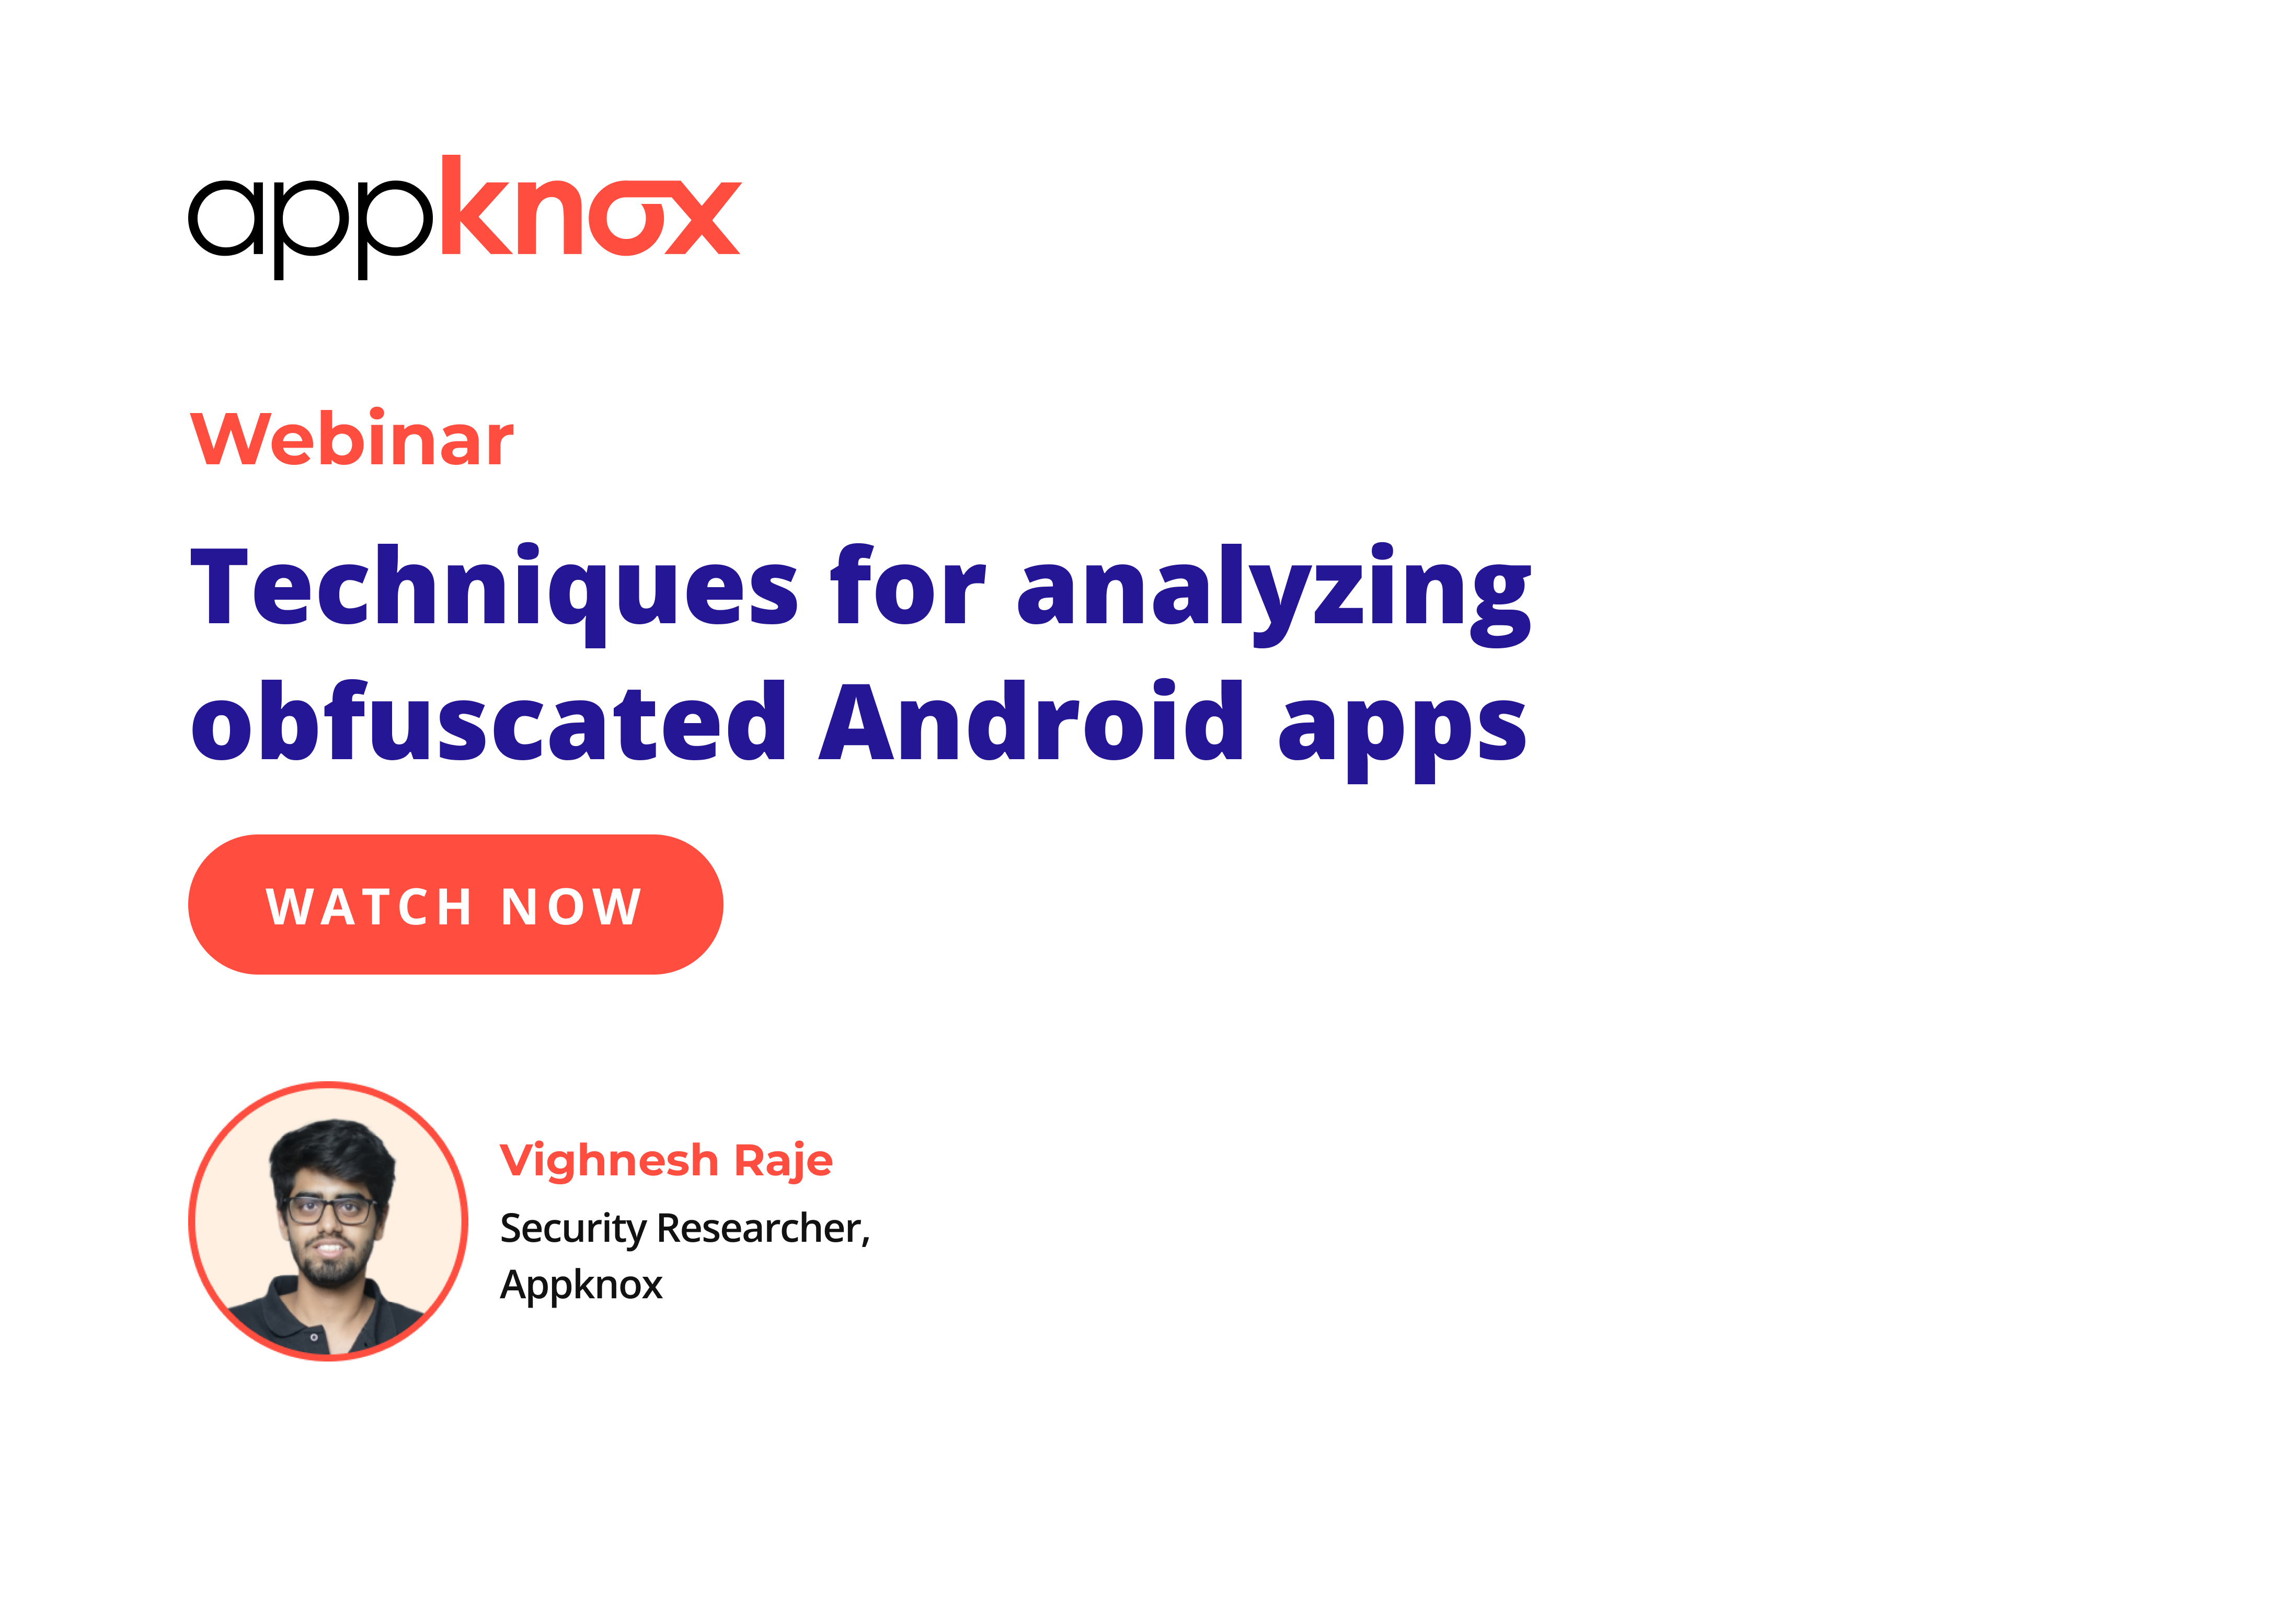 Learn the techniques for analyzing obfuscated Android apps. Speaker - Vighnesh Raje | Appknox webinar